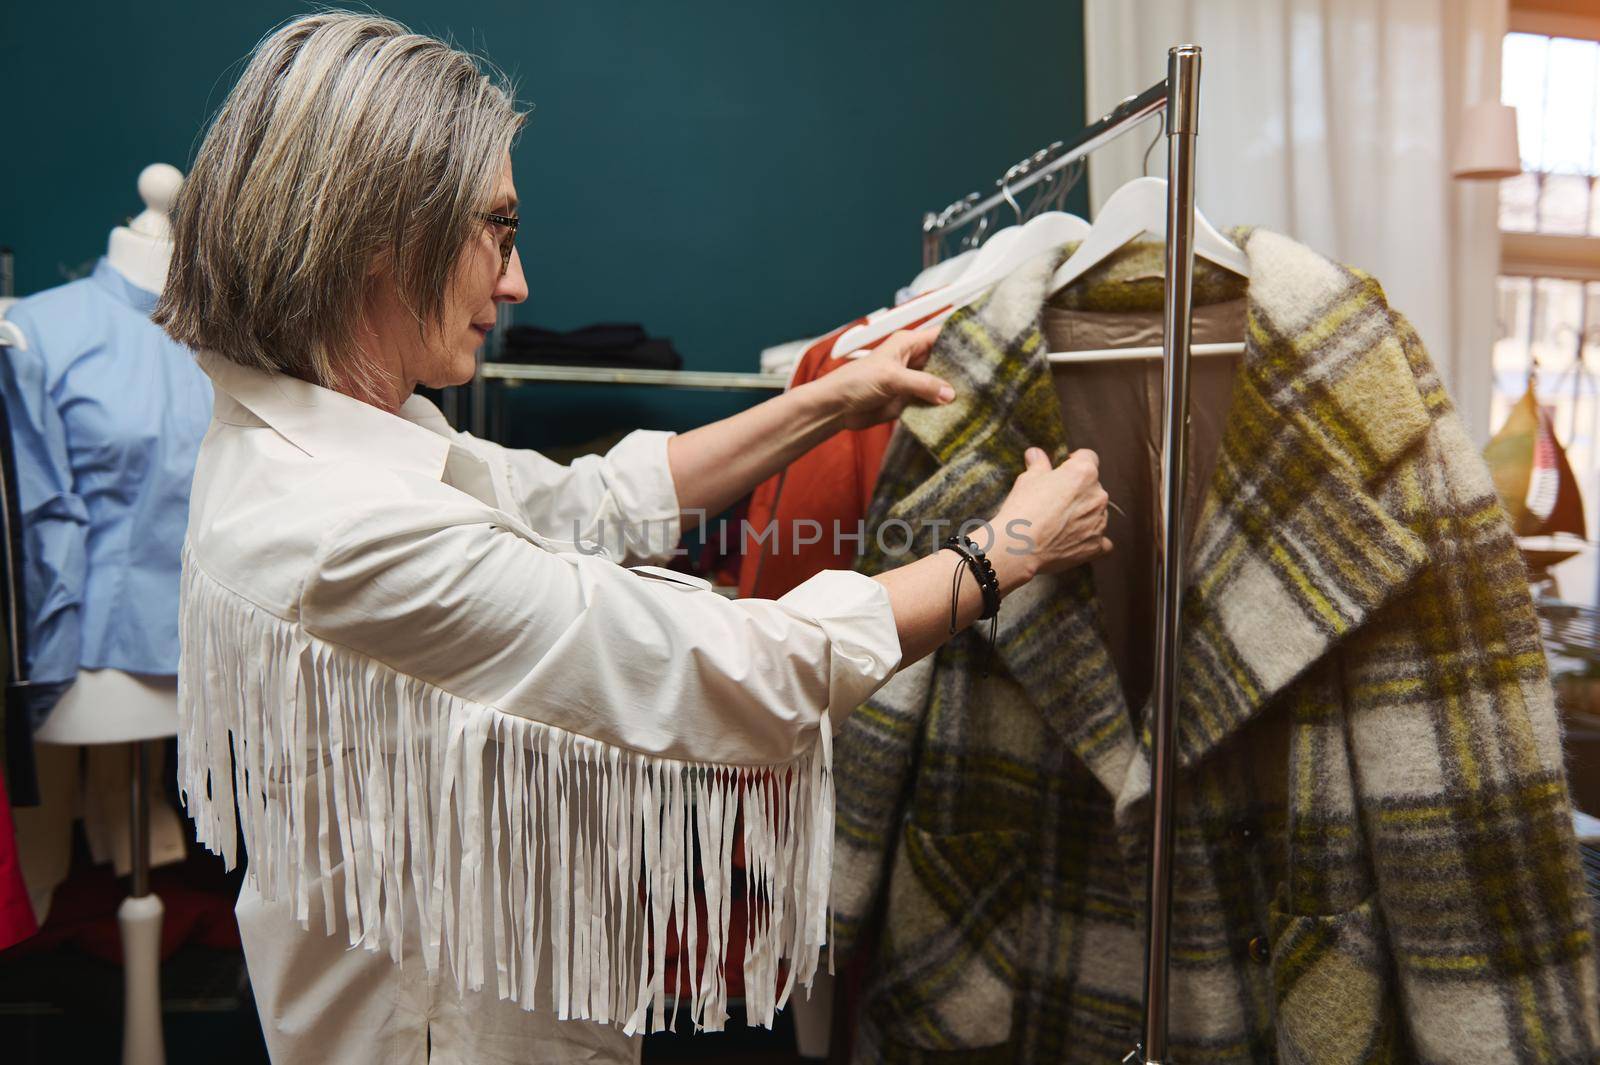 Caucasian mature woman, trendy fashion designer, tailor, seamstress standing in a garment storeroom, looking through the hangers with clothes ready for alteration. Tailoring, fashion design concept